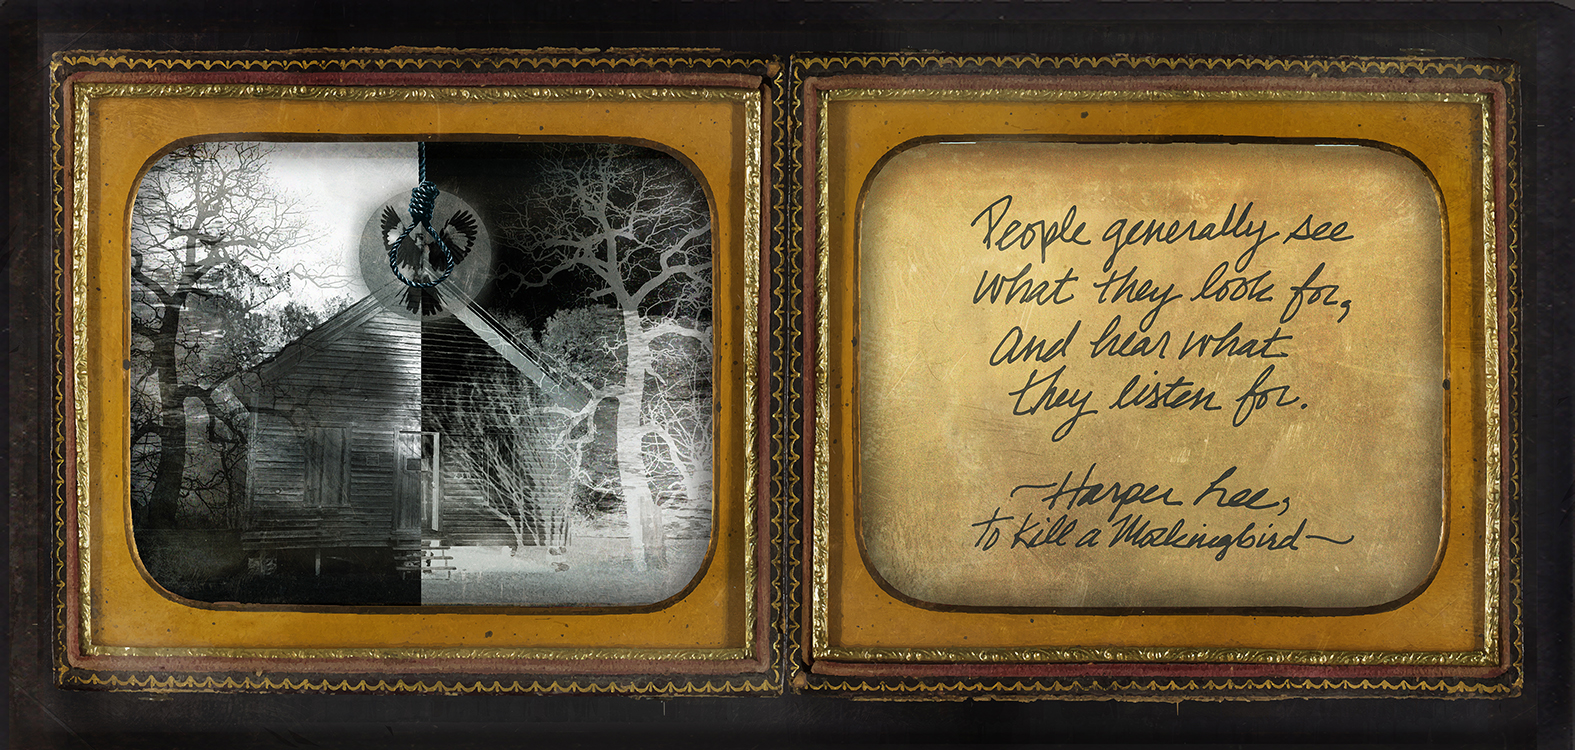 Southern Gothic Daguerreotype of Harper Lee's "To Kill a Mocking Bird"